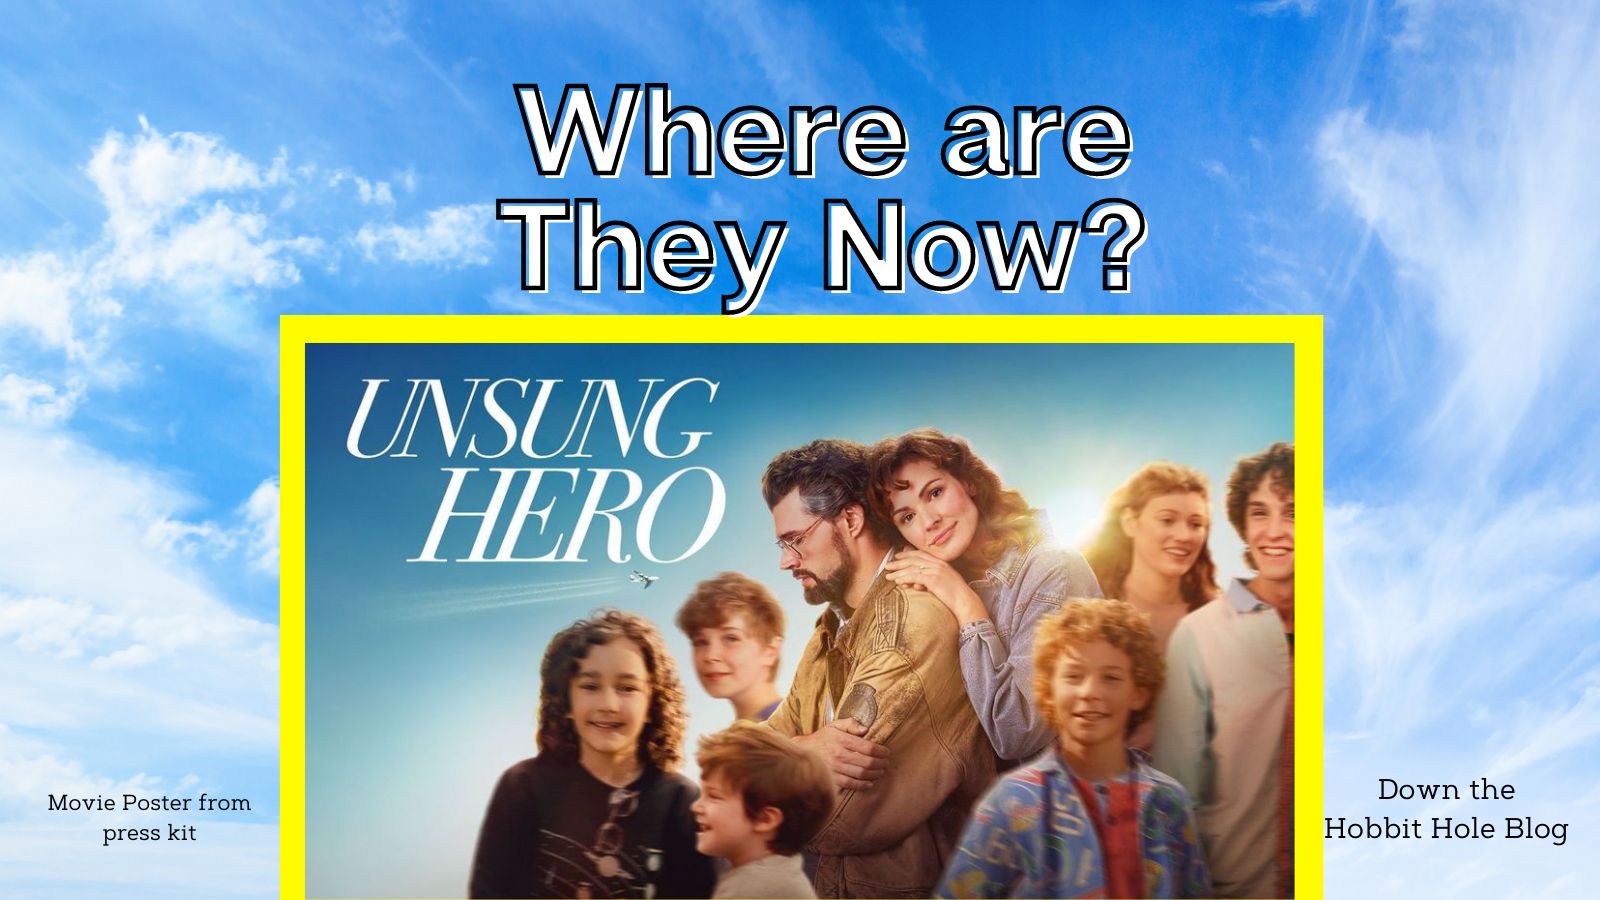 Where are they now unsung hero for king and country movie poster on a sky background